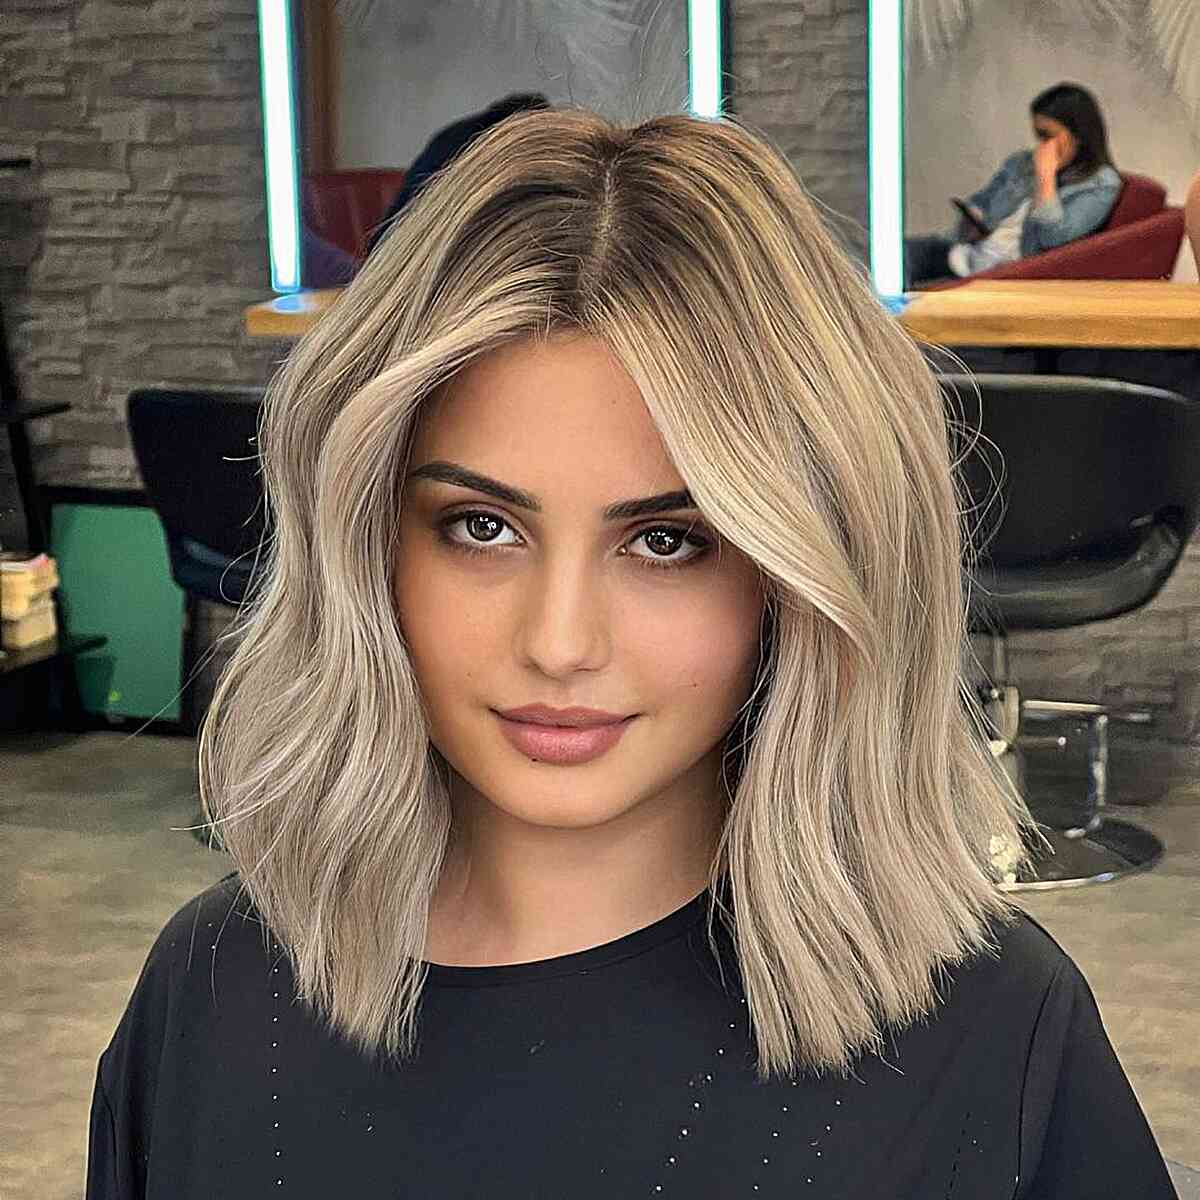 Dark Rooted Blunt Shoulder-Length Cut for women with blonde highlights 